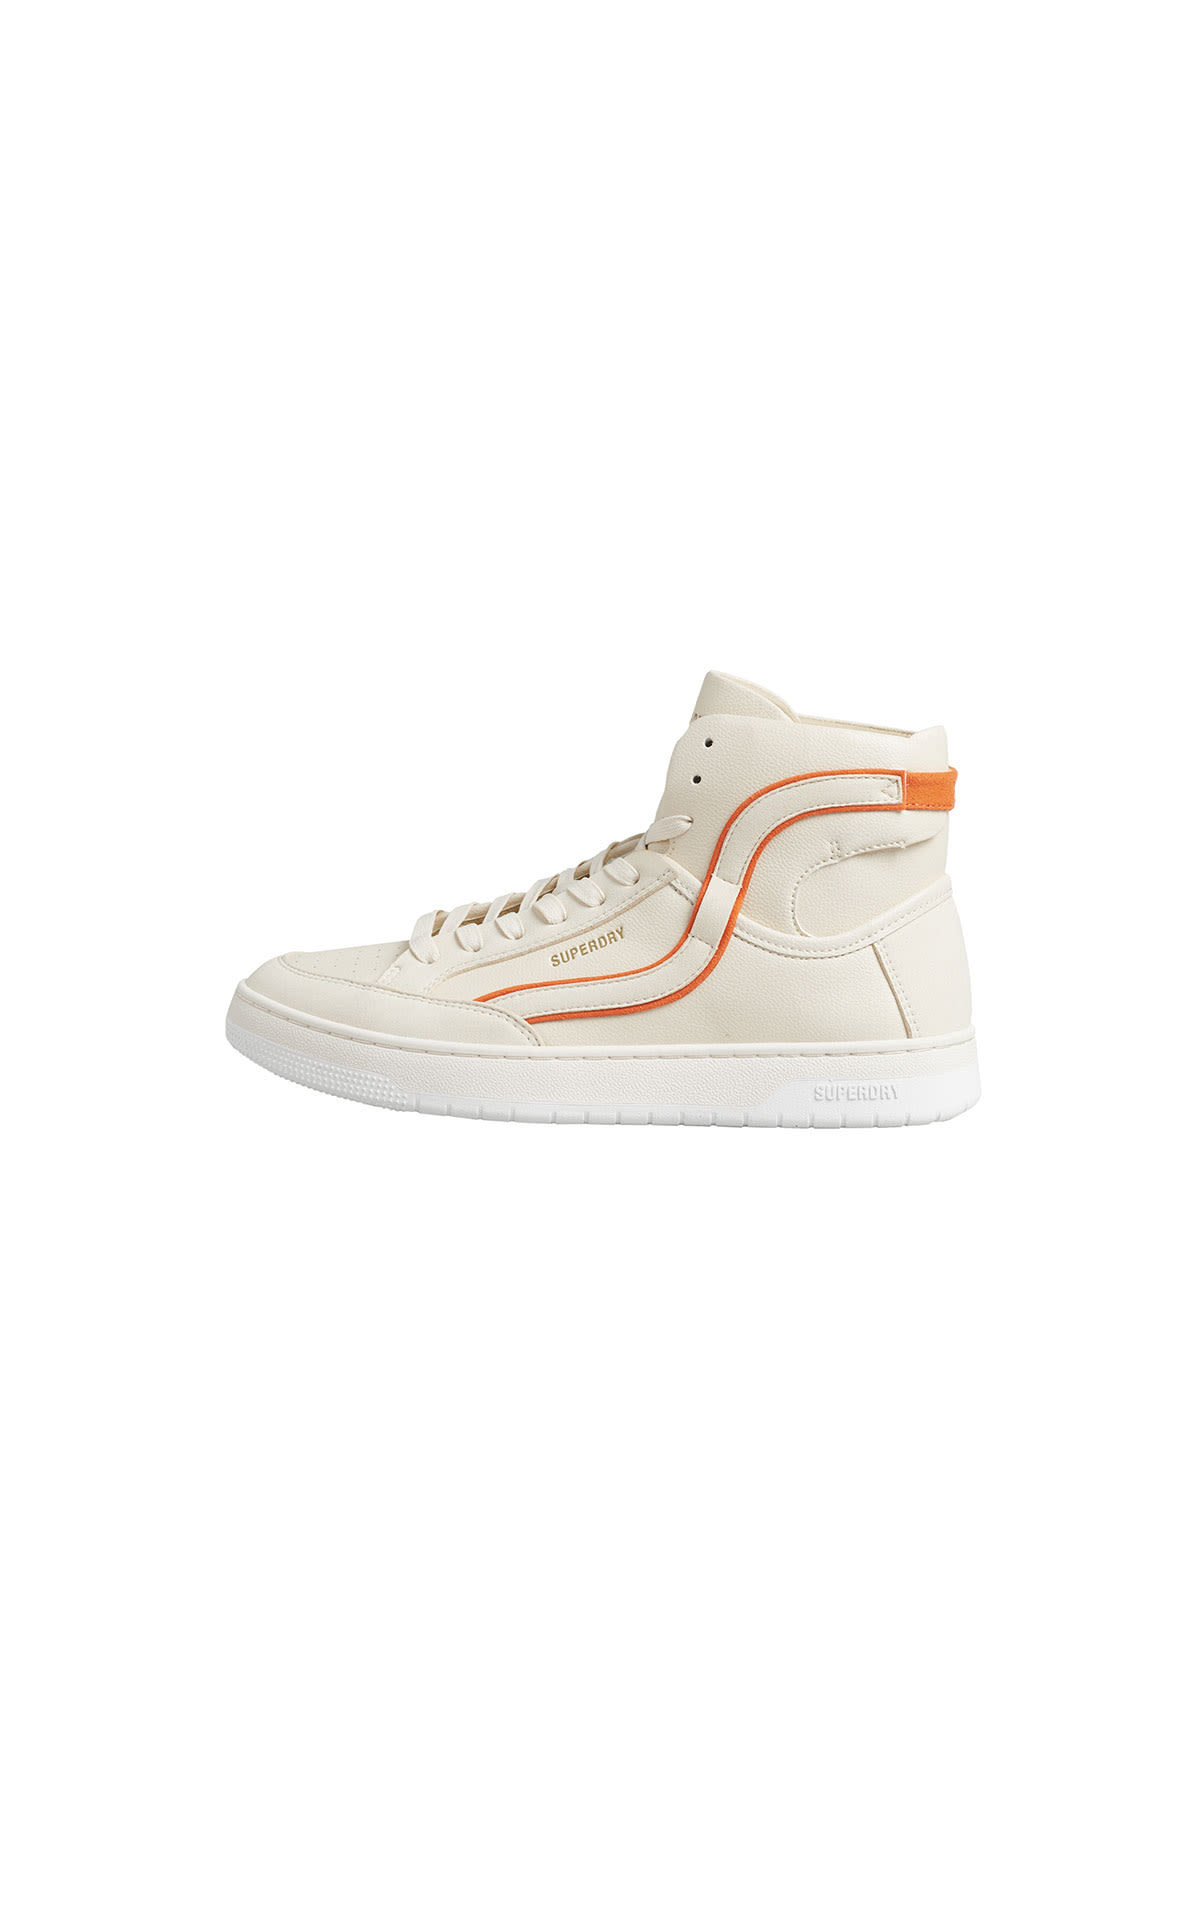 Superdry Oatmeal and spiced orange trainers mens from Bicester Village